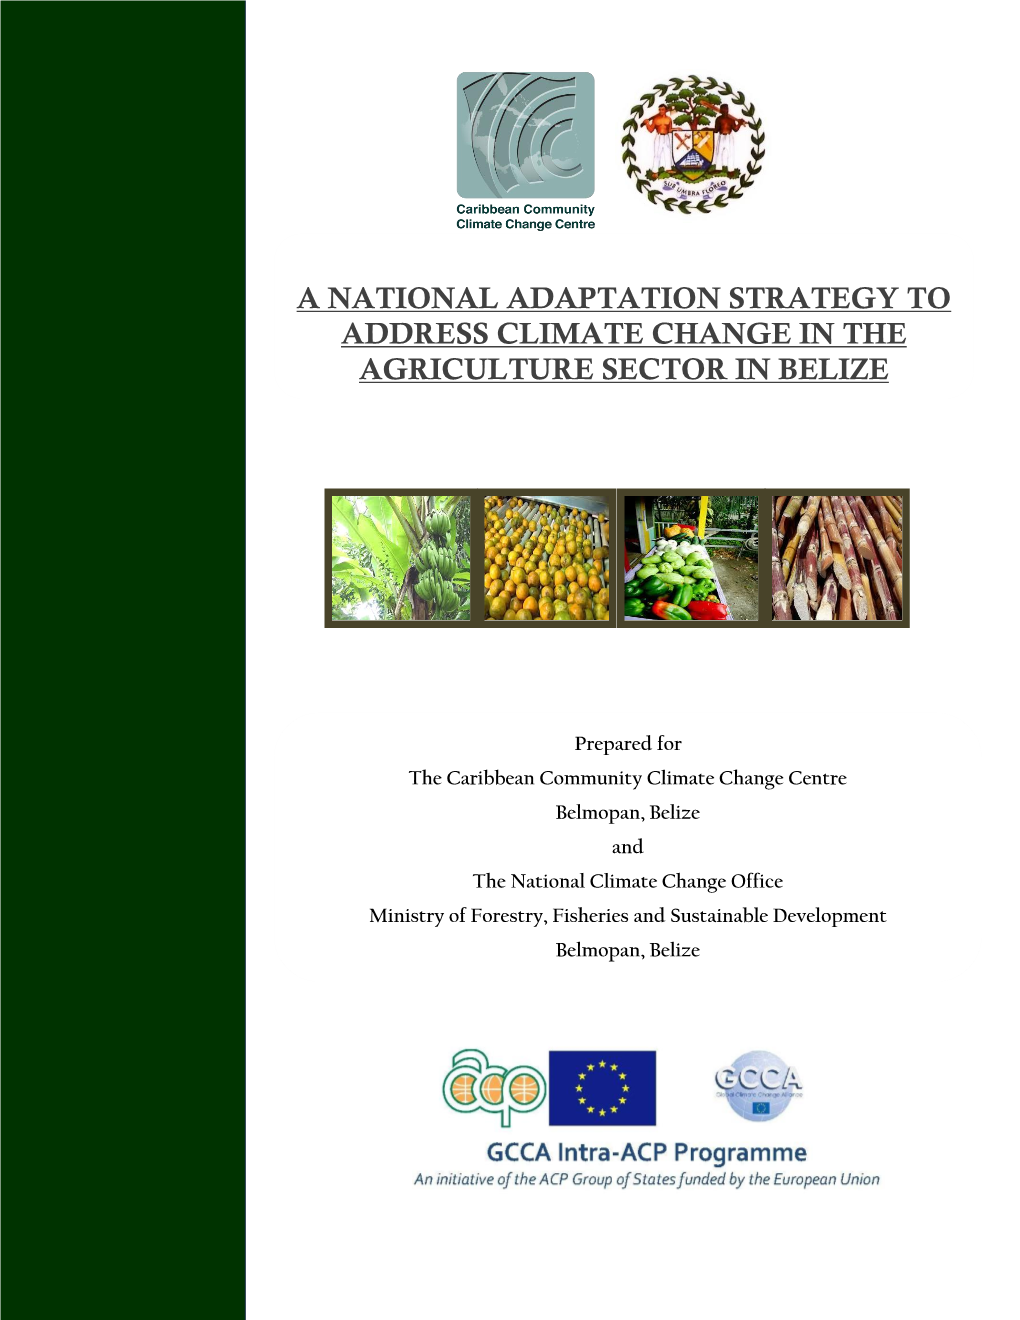 A National Adaptation Strategy to Address Climate Change in the Agriculture Sector in Belize